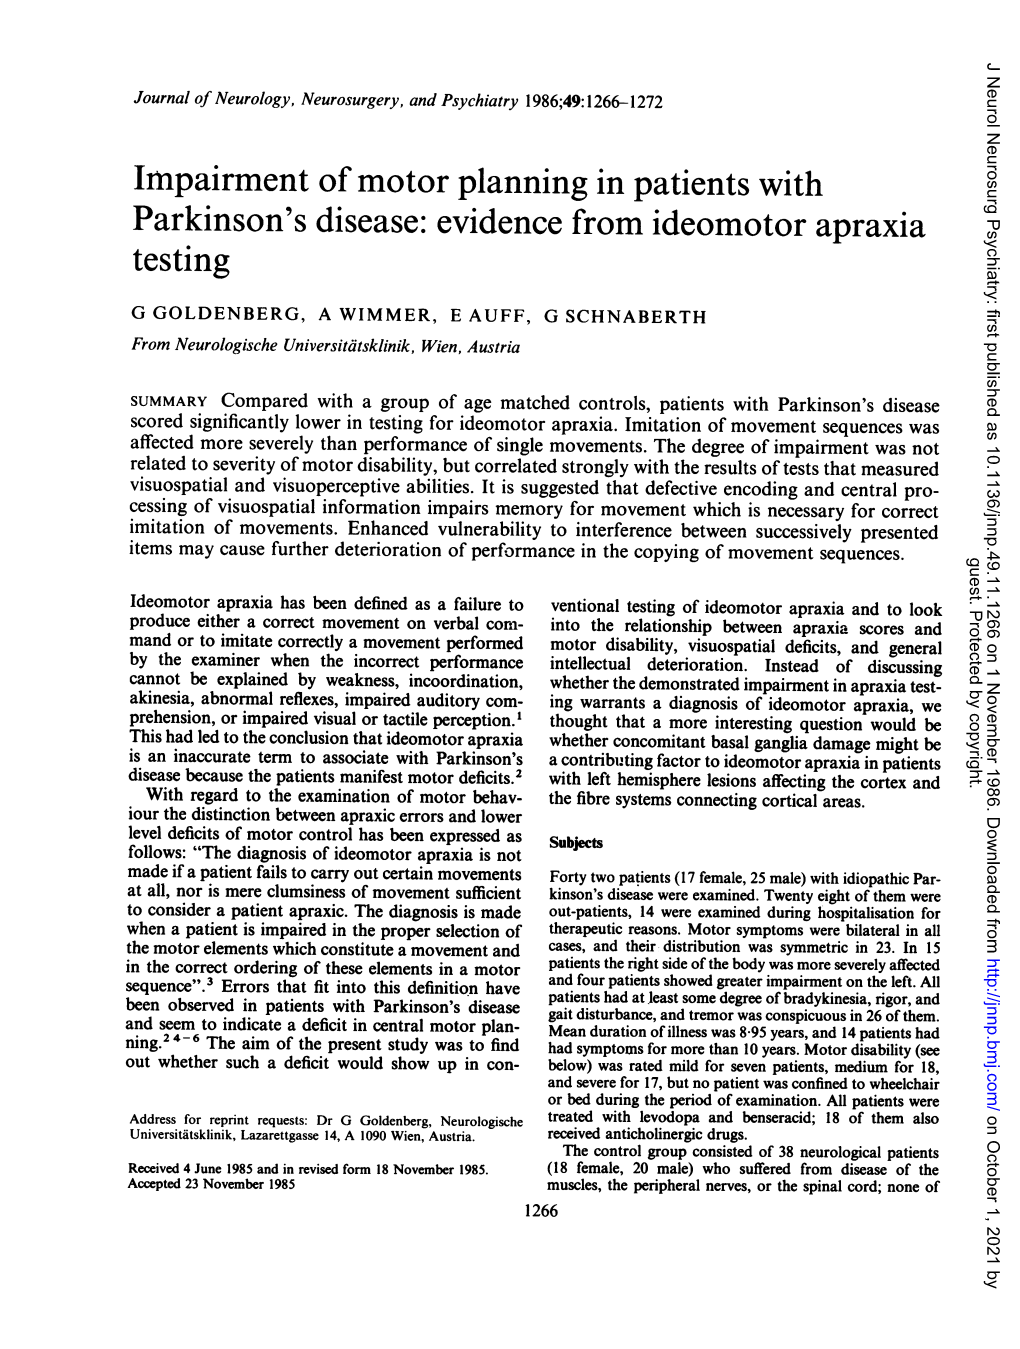 Parkinson's Disease: Evidence from Ideomotor Apraxia Testing